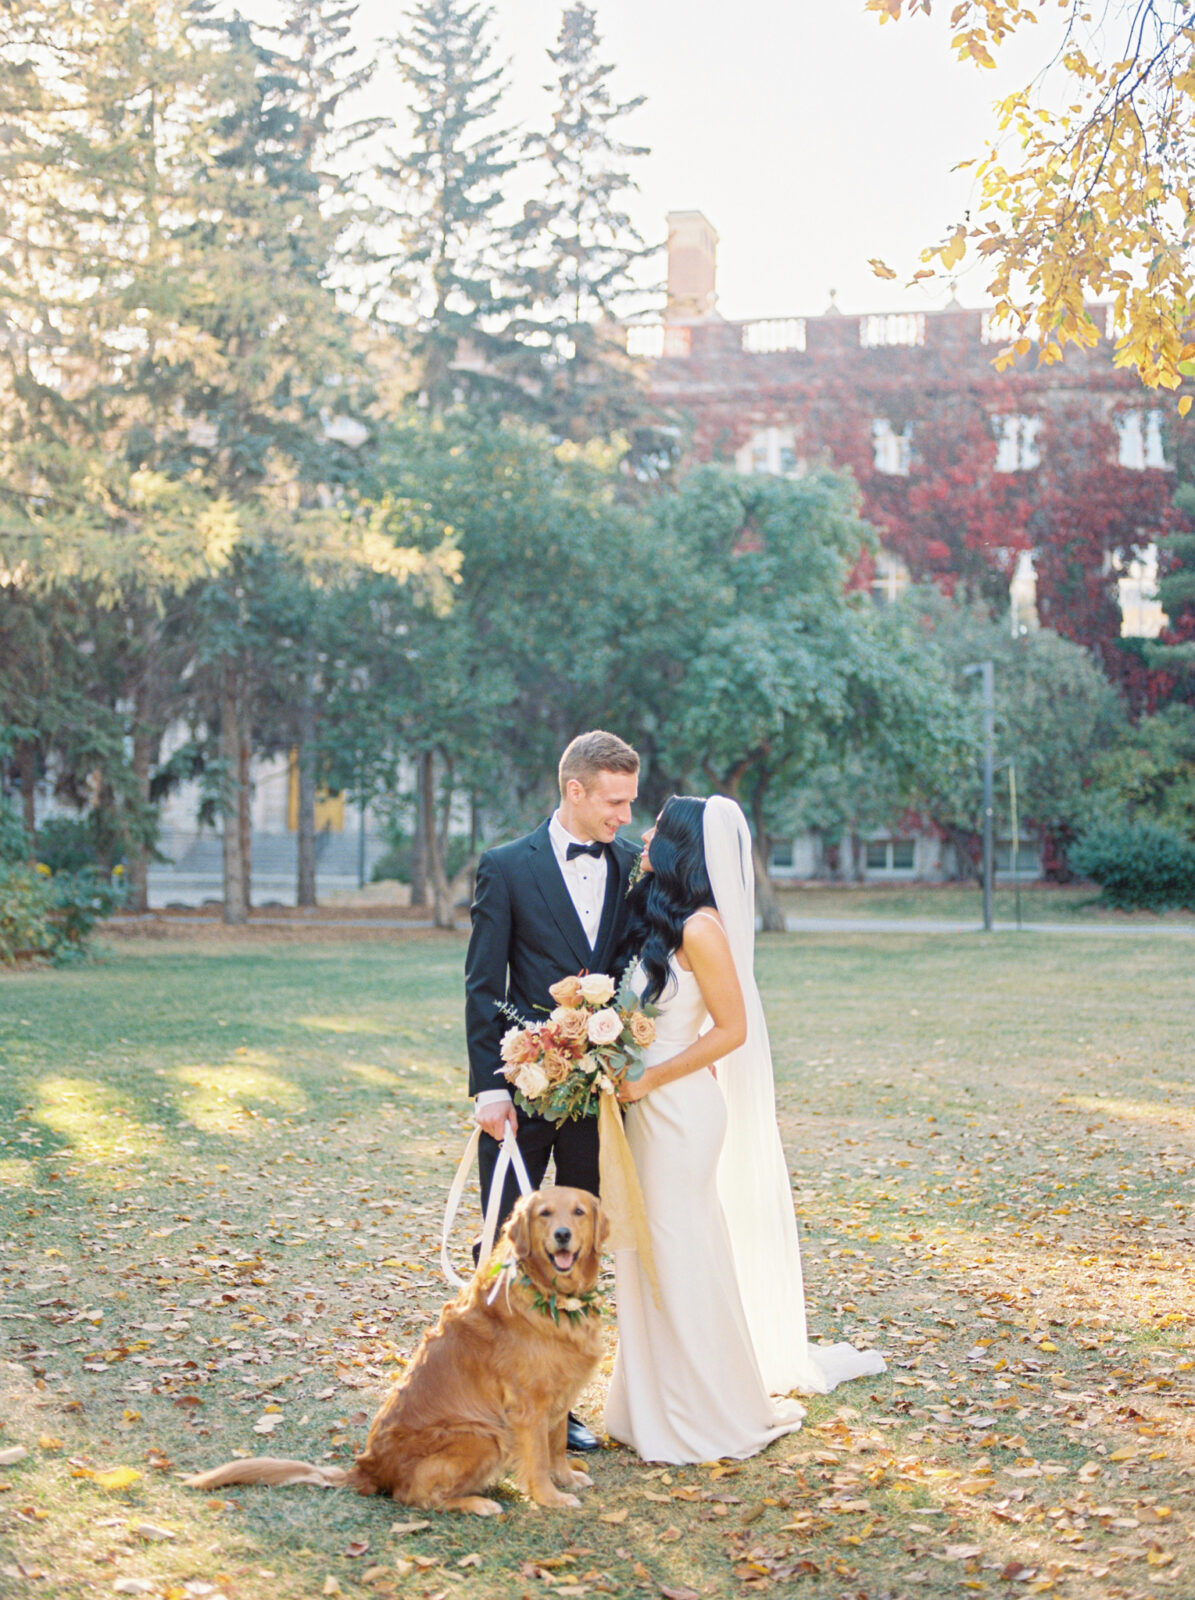 Gorgeous Fall Colours at Golden Hour In This Warm October Wedding | Brontë Bride